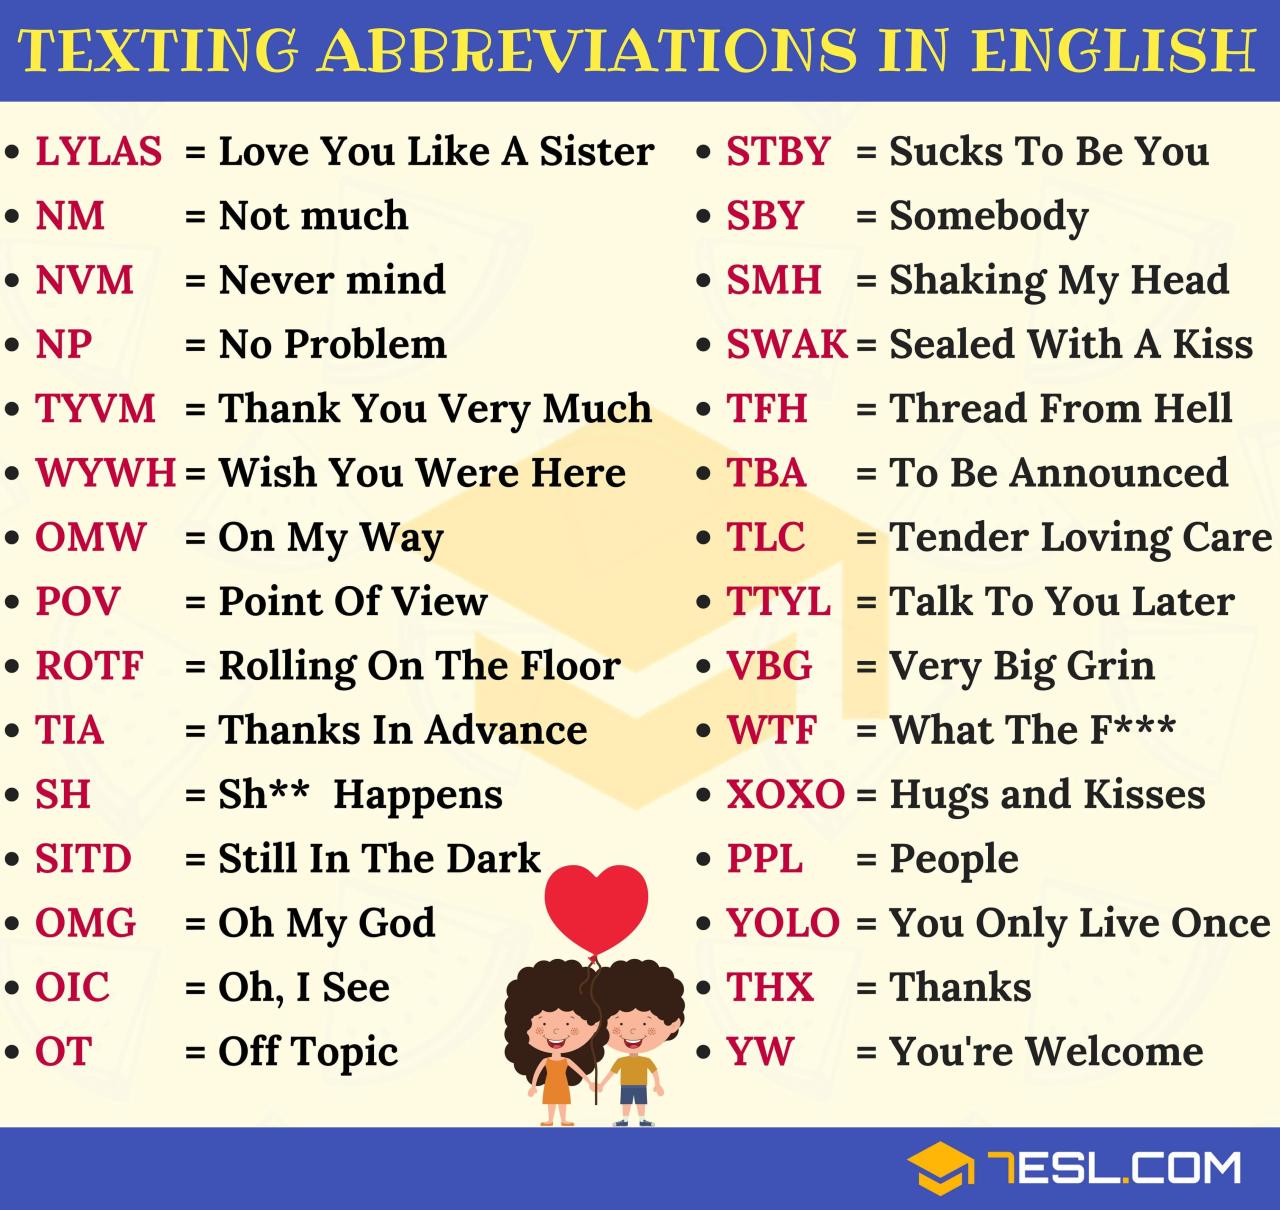 Texting Abbreviations 3000 Popular Text Acronyms in English • 7ESL Sms language, Learn